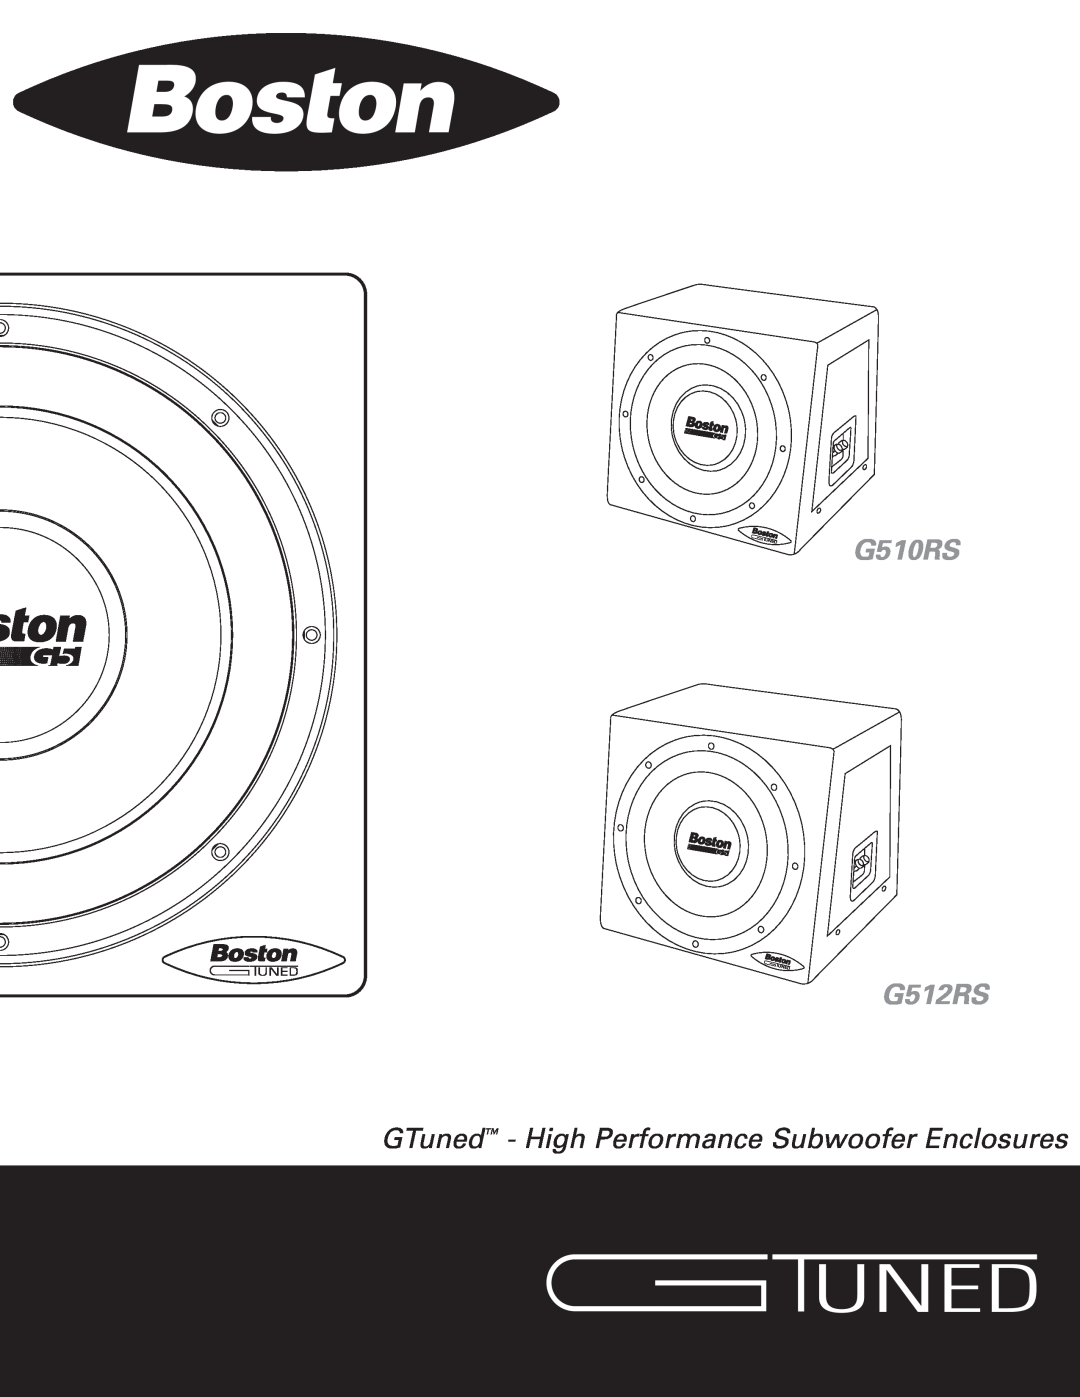 Boston Acoustics manual GTuned - High Performance Subwoofer Enclosures, G510RS G512RS 